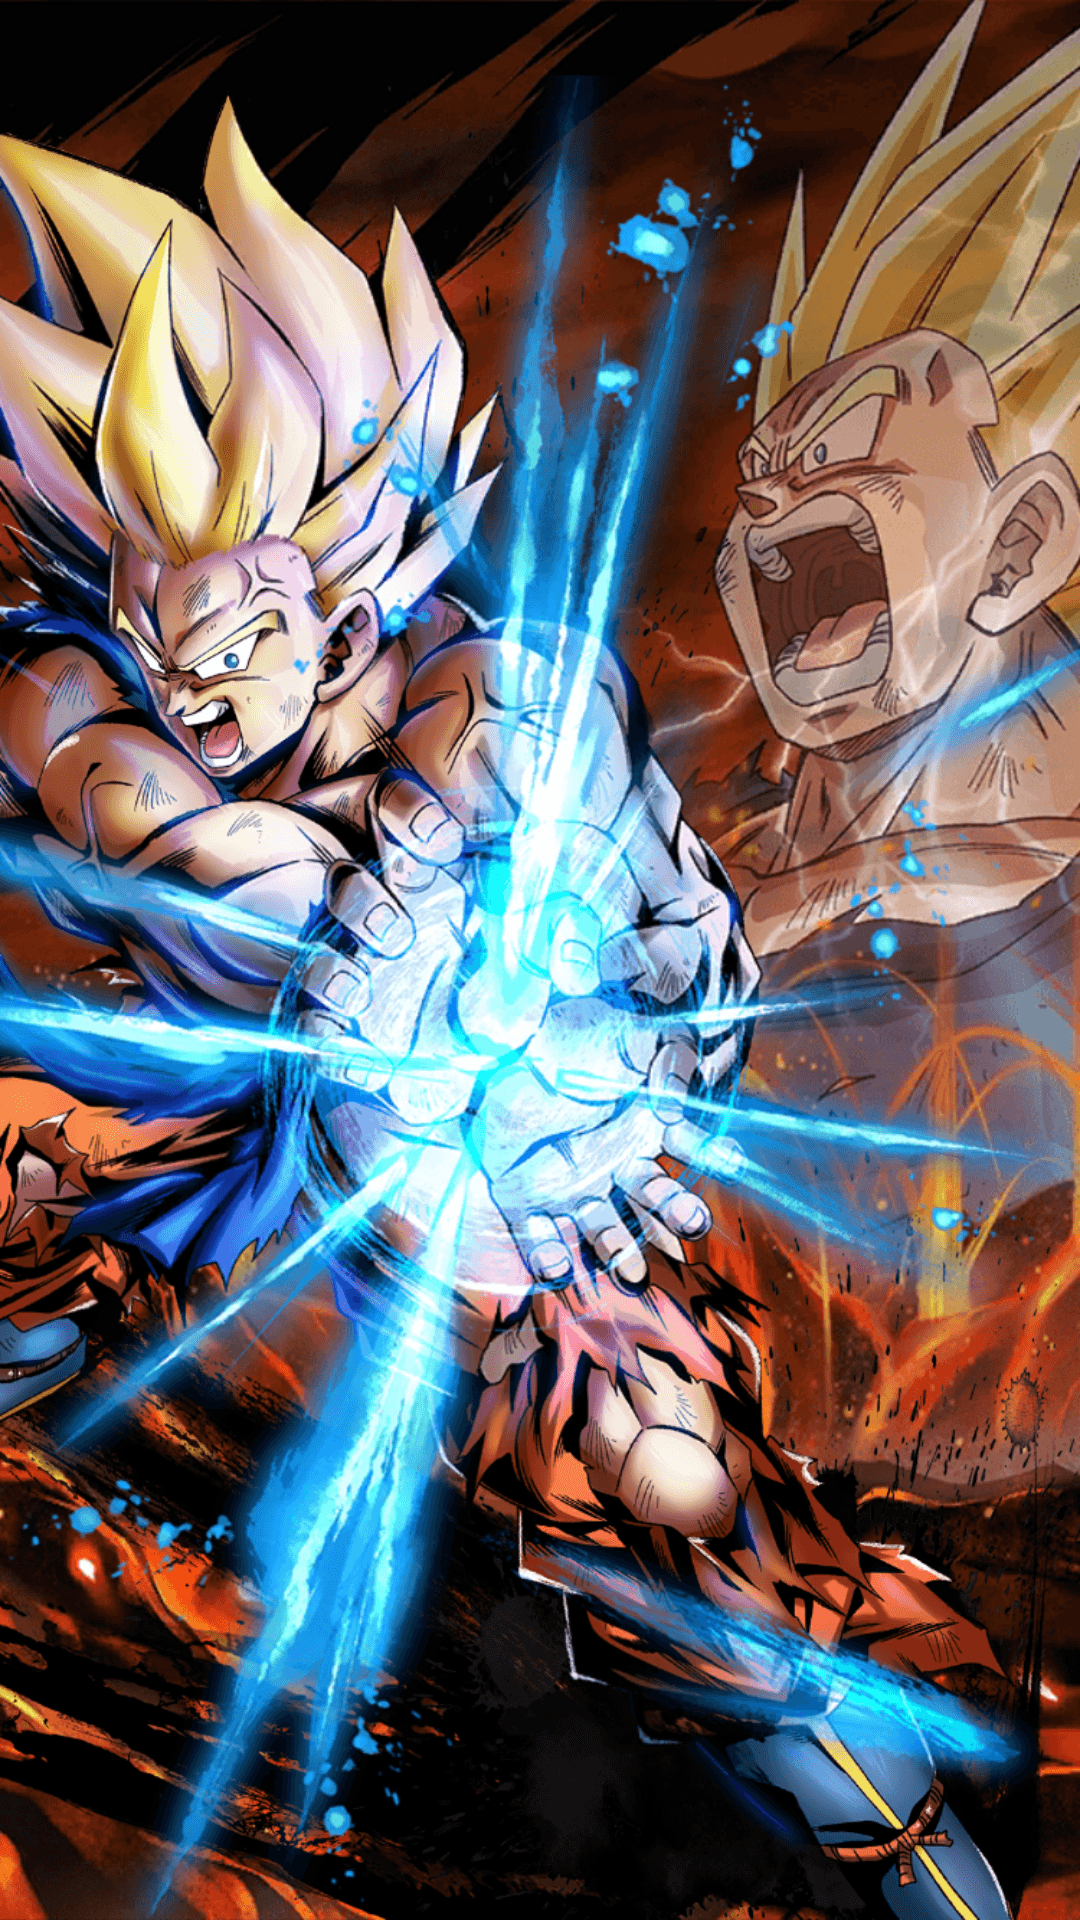 Dragonball lovers, Goku HD Wallpaper Android or iPhone